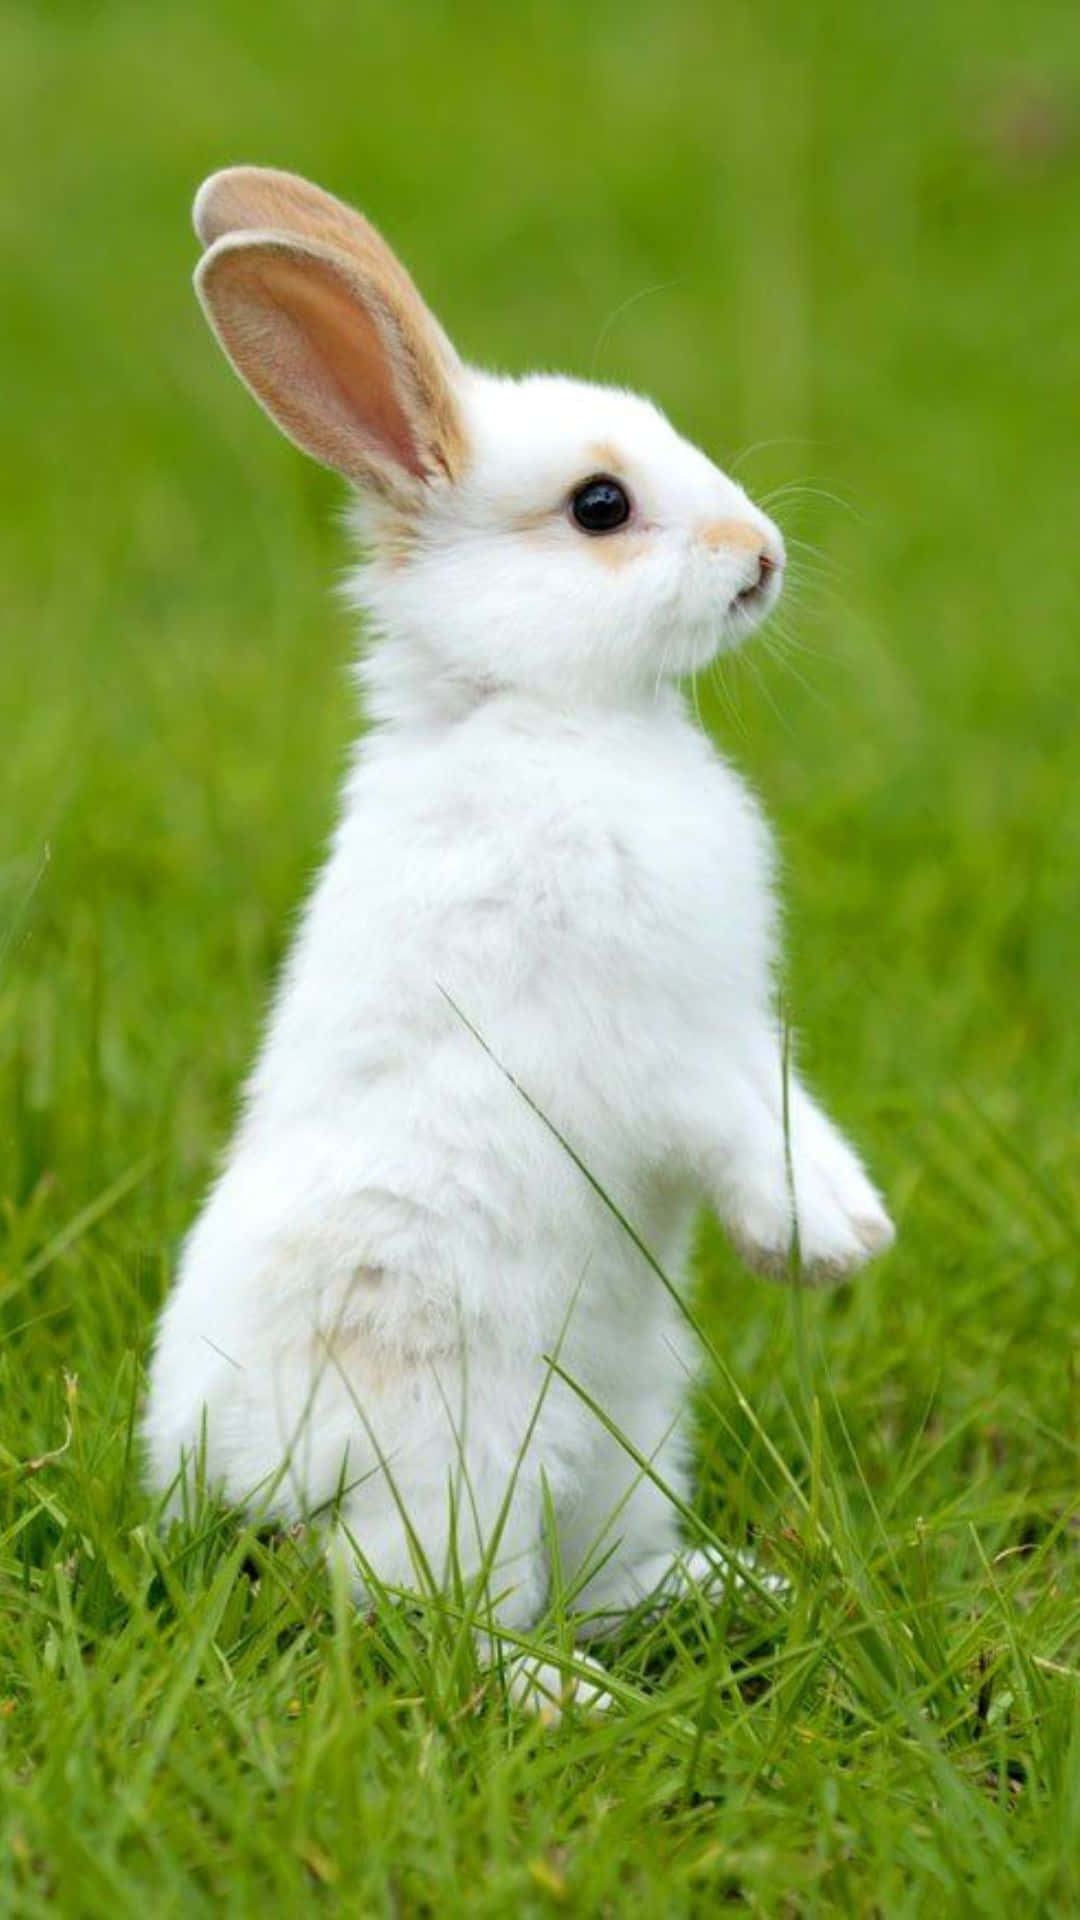 Look how adorable this bunny is on the new Iphone! Wallpaper